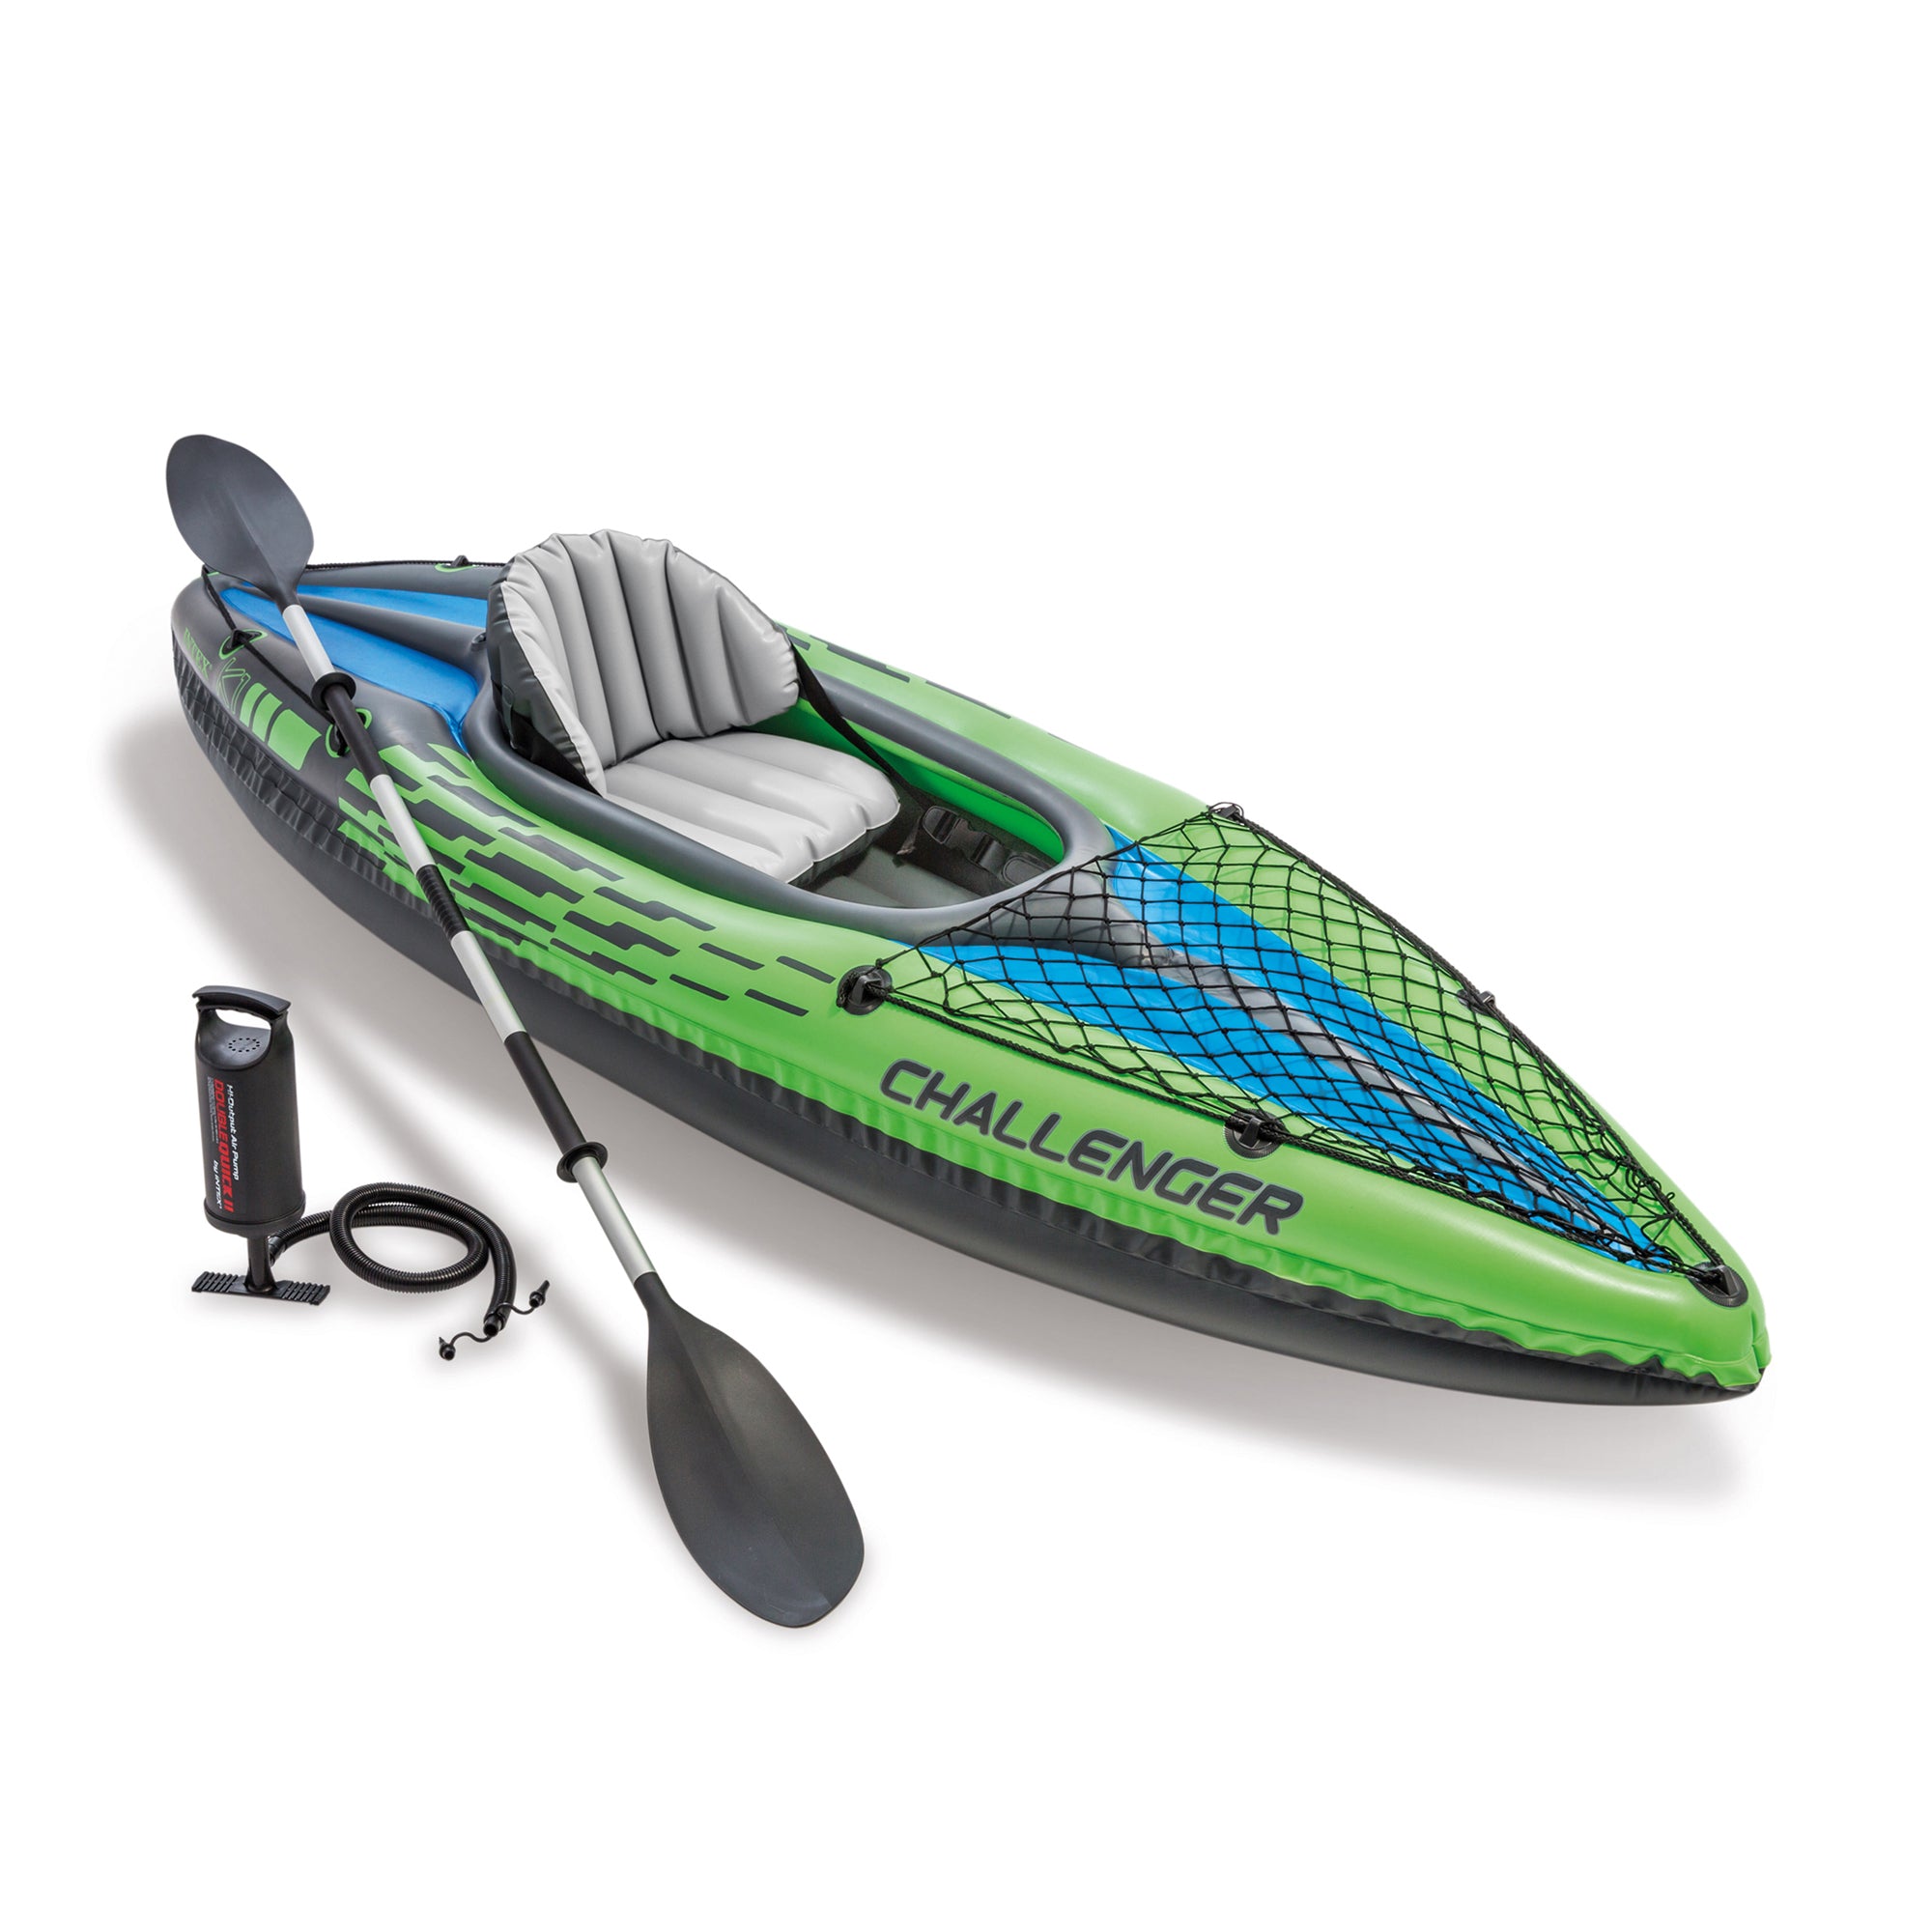 Intex Excursion 5 Person Inflatable Fishing Raft Boat with